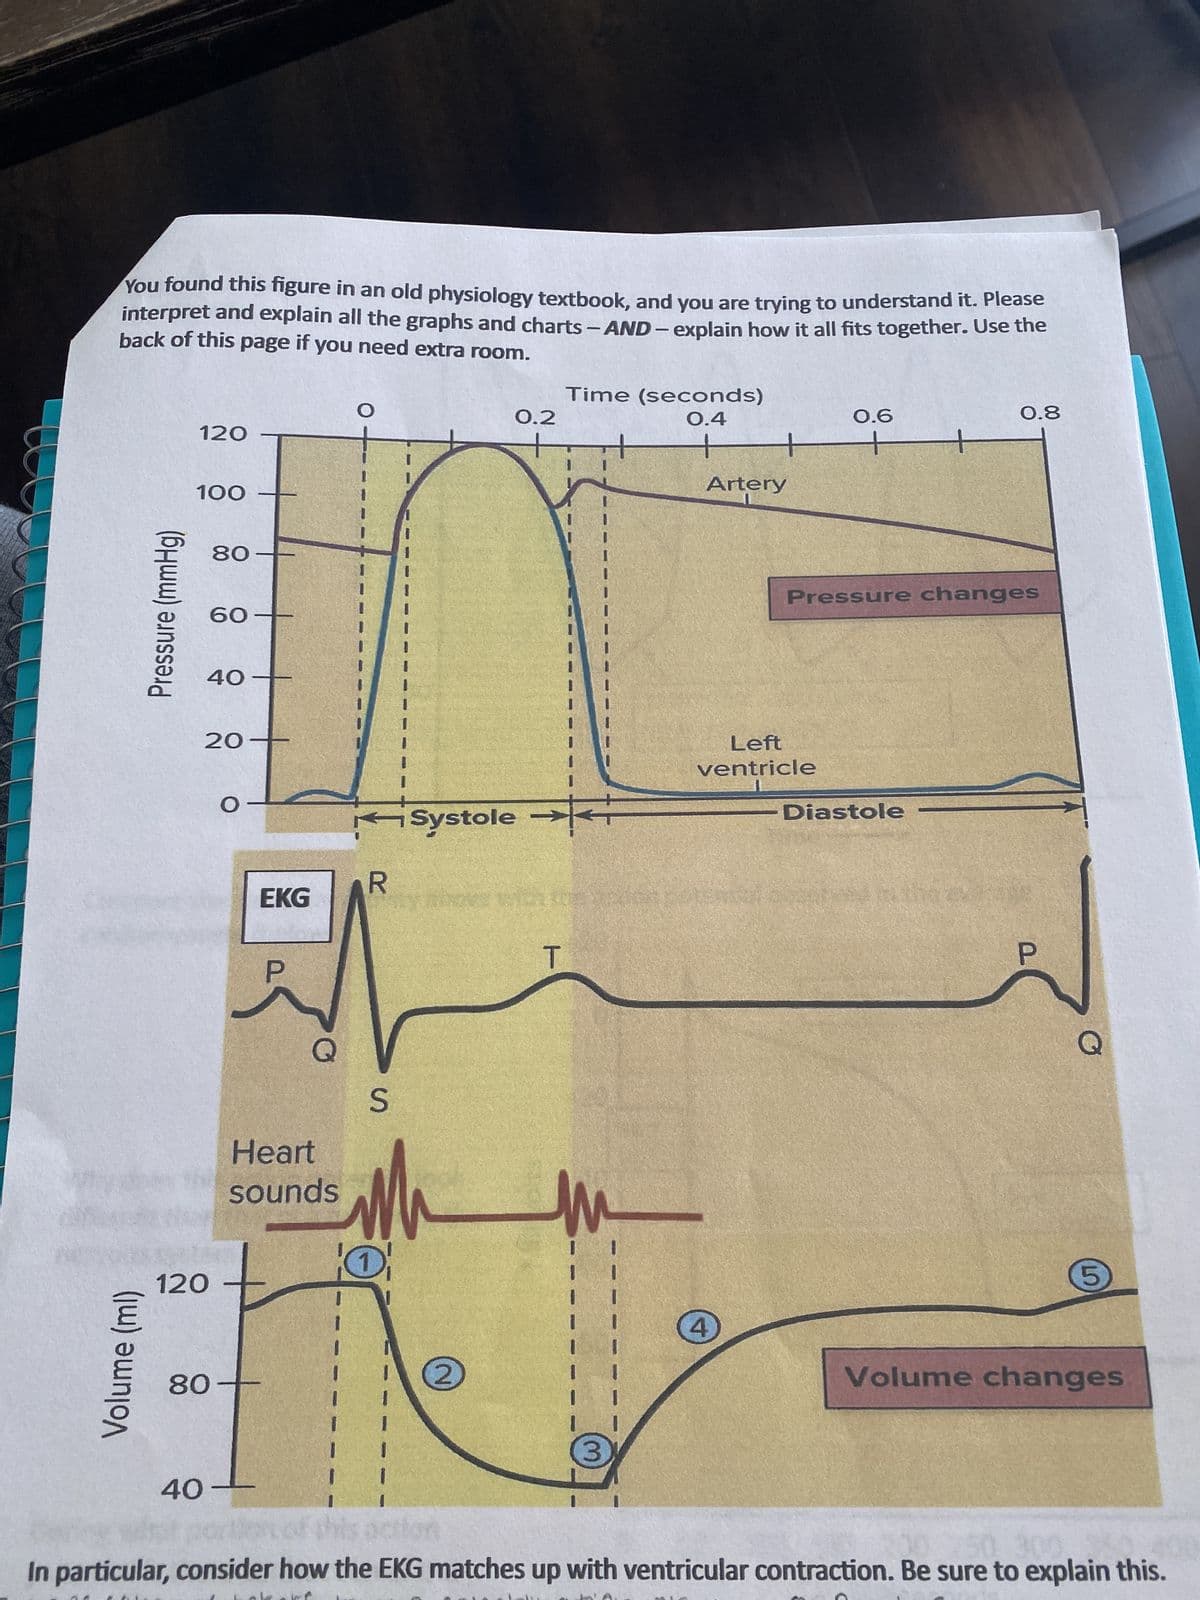 You found this figure in an old physiology textbook, and you are trying to understand it. Please
interpret and explain all the graphs and charts -AND-explain how it all fits together. Use the
back of this page if you need extra room.
Volume (ml)
Pressure (mmHg)
120
100
60
40
80
40
120
20
80
O
EKG
P
Q
Heart
sounds
O
R
S
Wh
①
0.2
→
Systole +
2
Time (seconds)
0.4
T
Artery
Left
ventricle
4
0.6
Pressure changes
0.8
Diastole
P
5
Volume changes
00 250 300,
In particular, consider how the EKG matches up with ventricular contraction. Be sure to explain this.